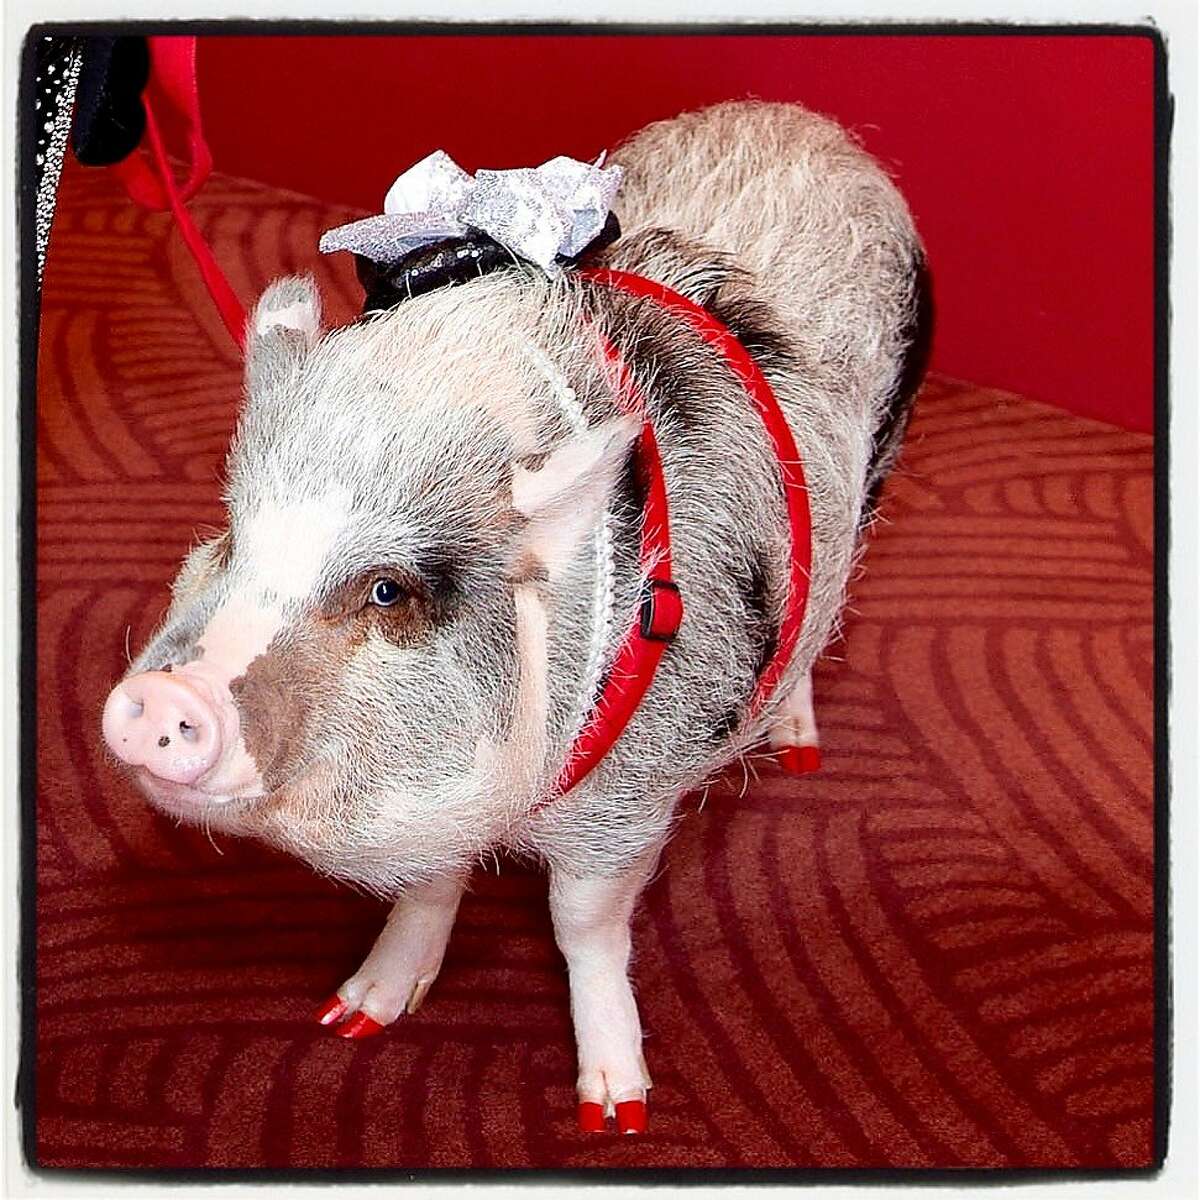 LiLou the therapy pig attends the SFS Chinese New Year gala. Feb. 16, 2019.